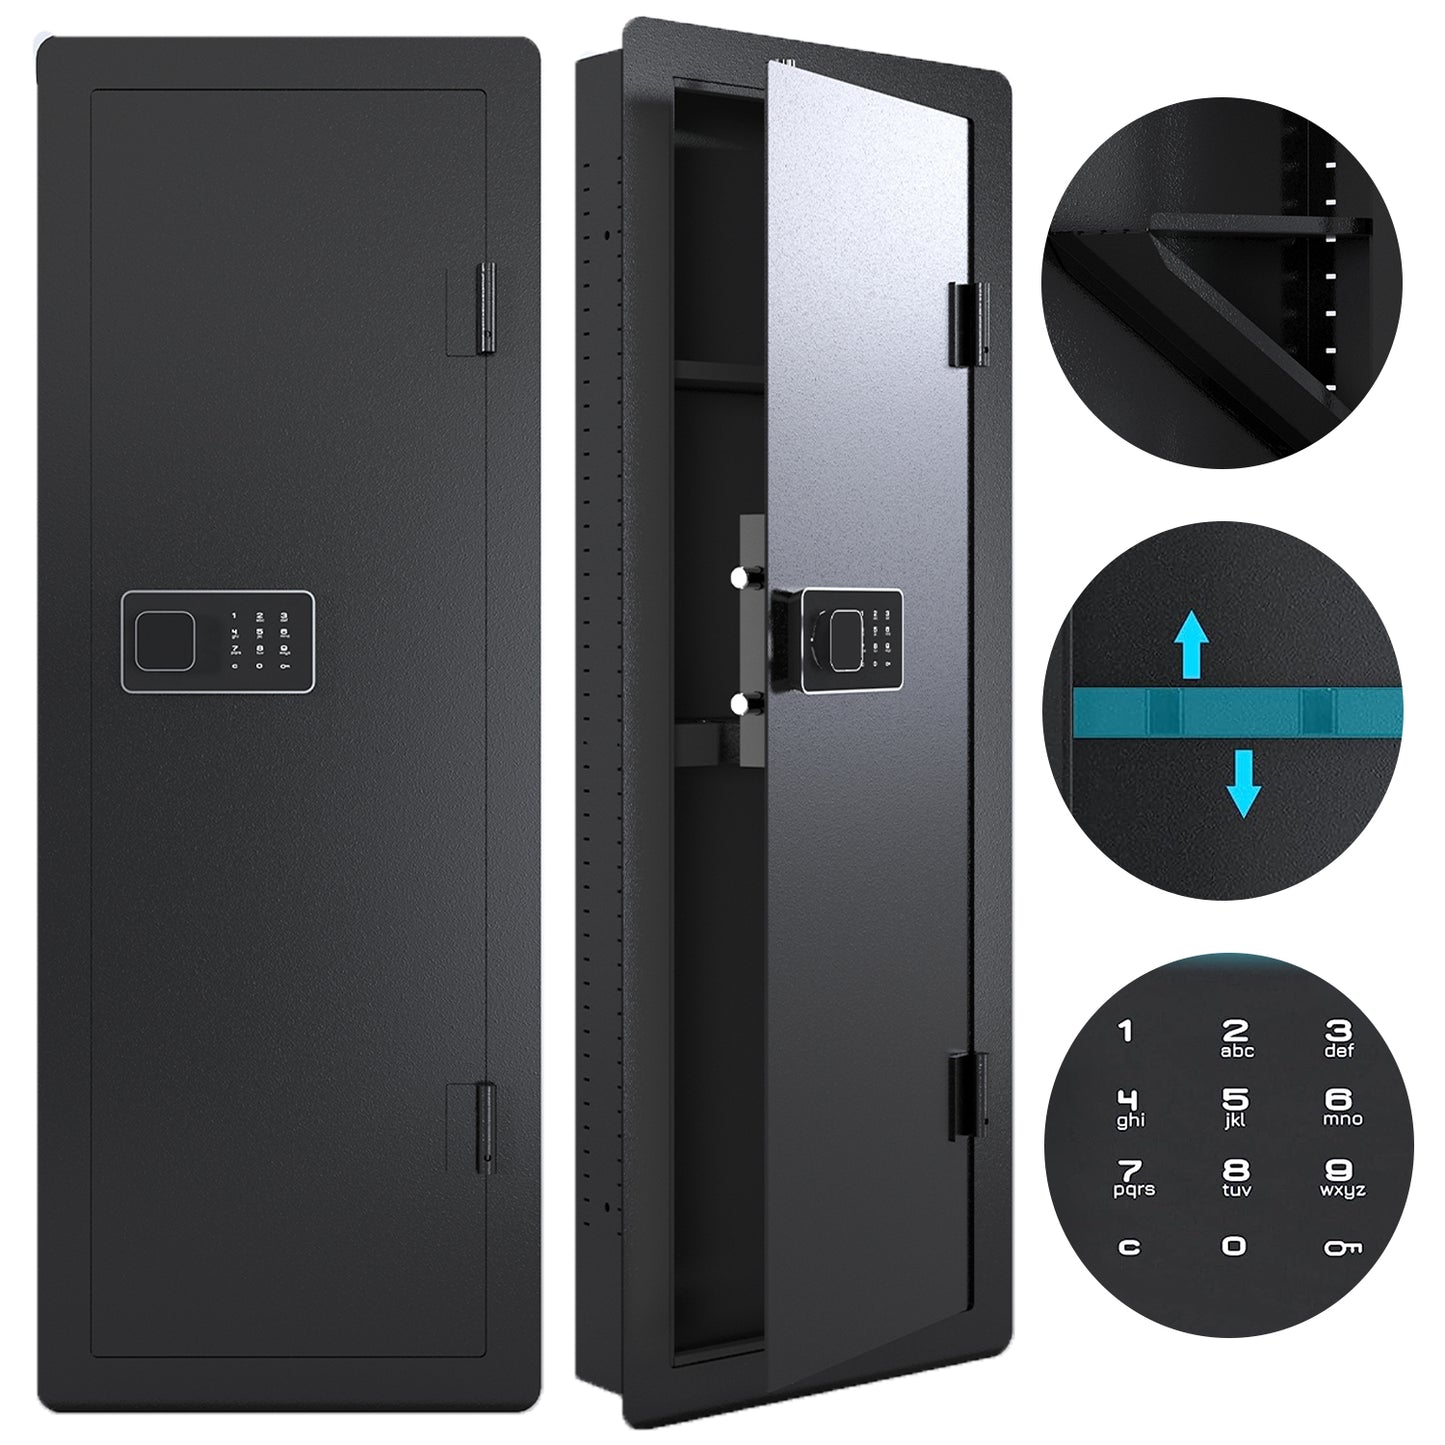 M/45" Tall Wall Safe, Hidden Wall Safes Between the Studs for Home Shotguns and Pistols, Wall Safes With Removable Shelf and Ammo Storage Shelf, Large Wall Long Safe for Money Documents Valuables